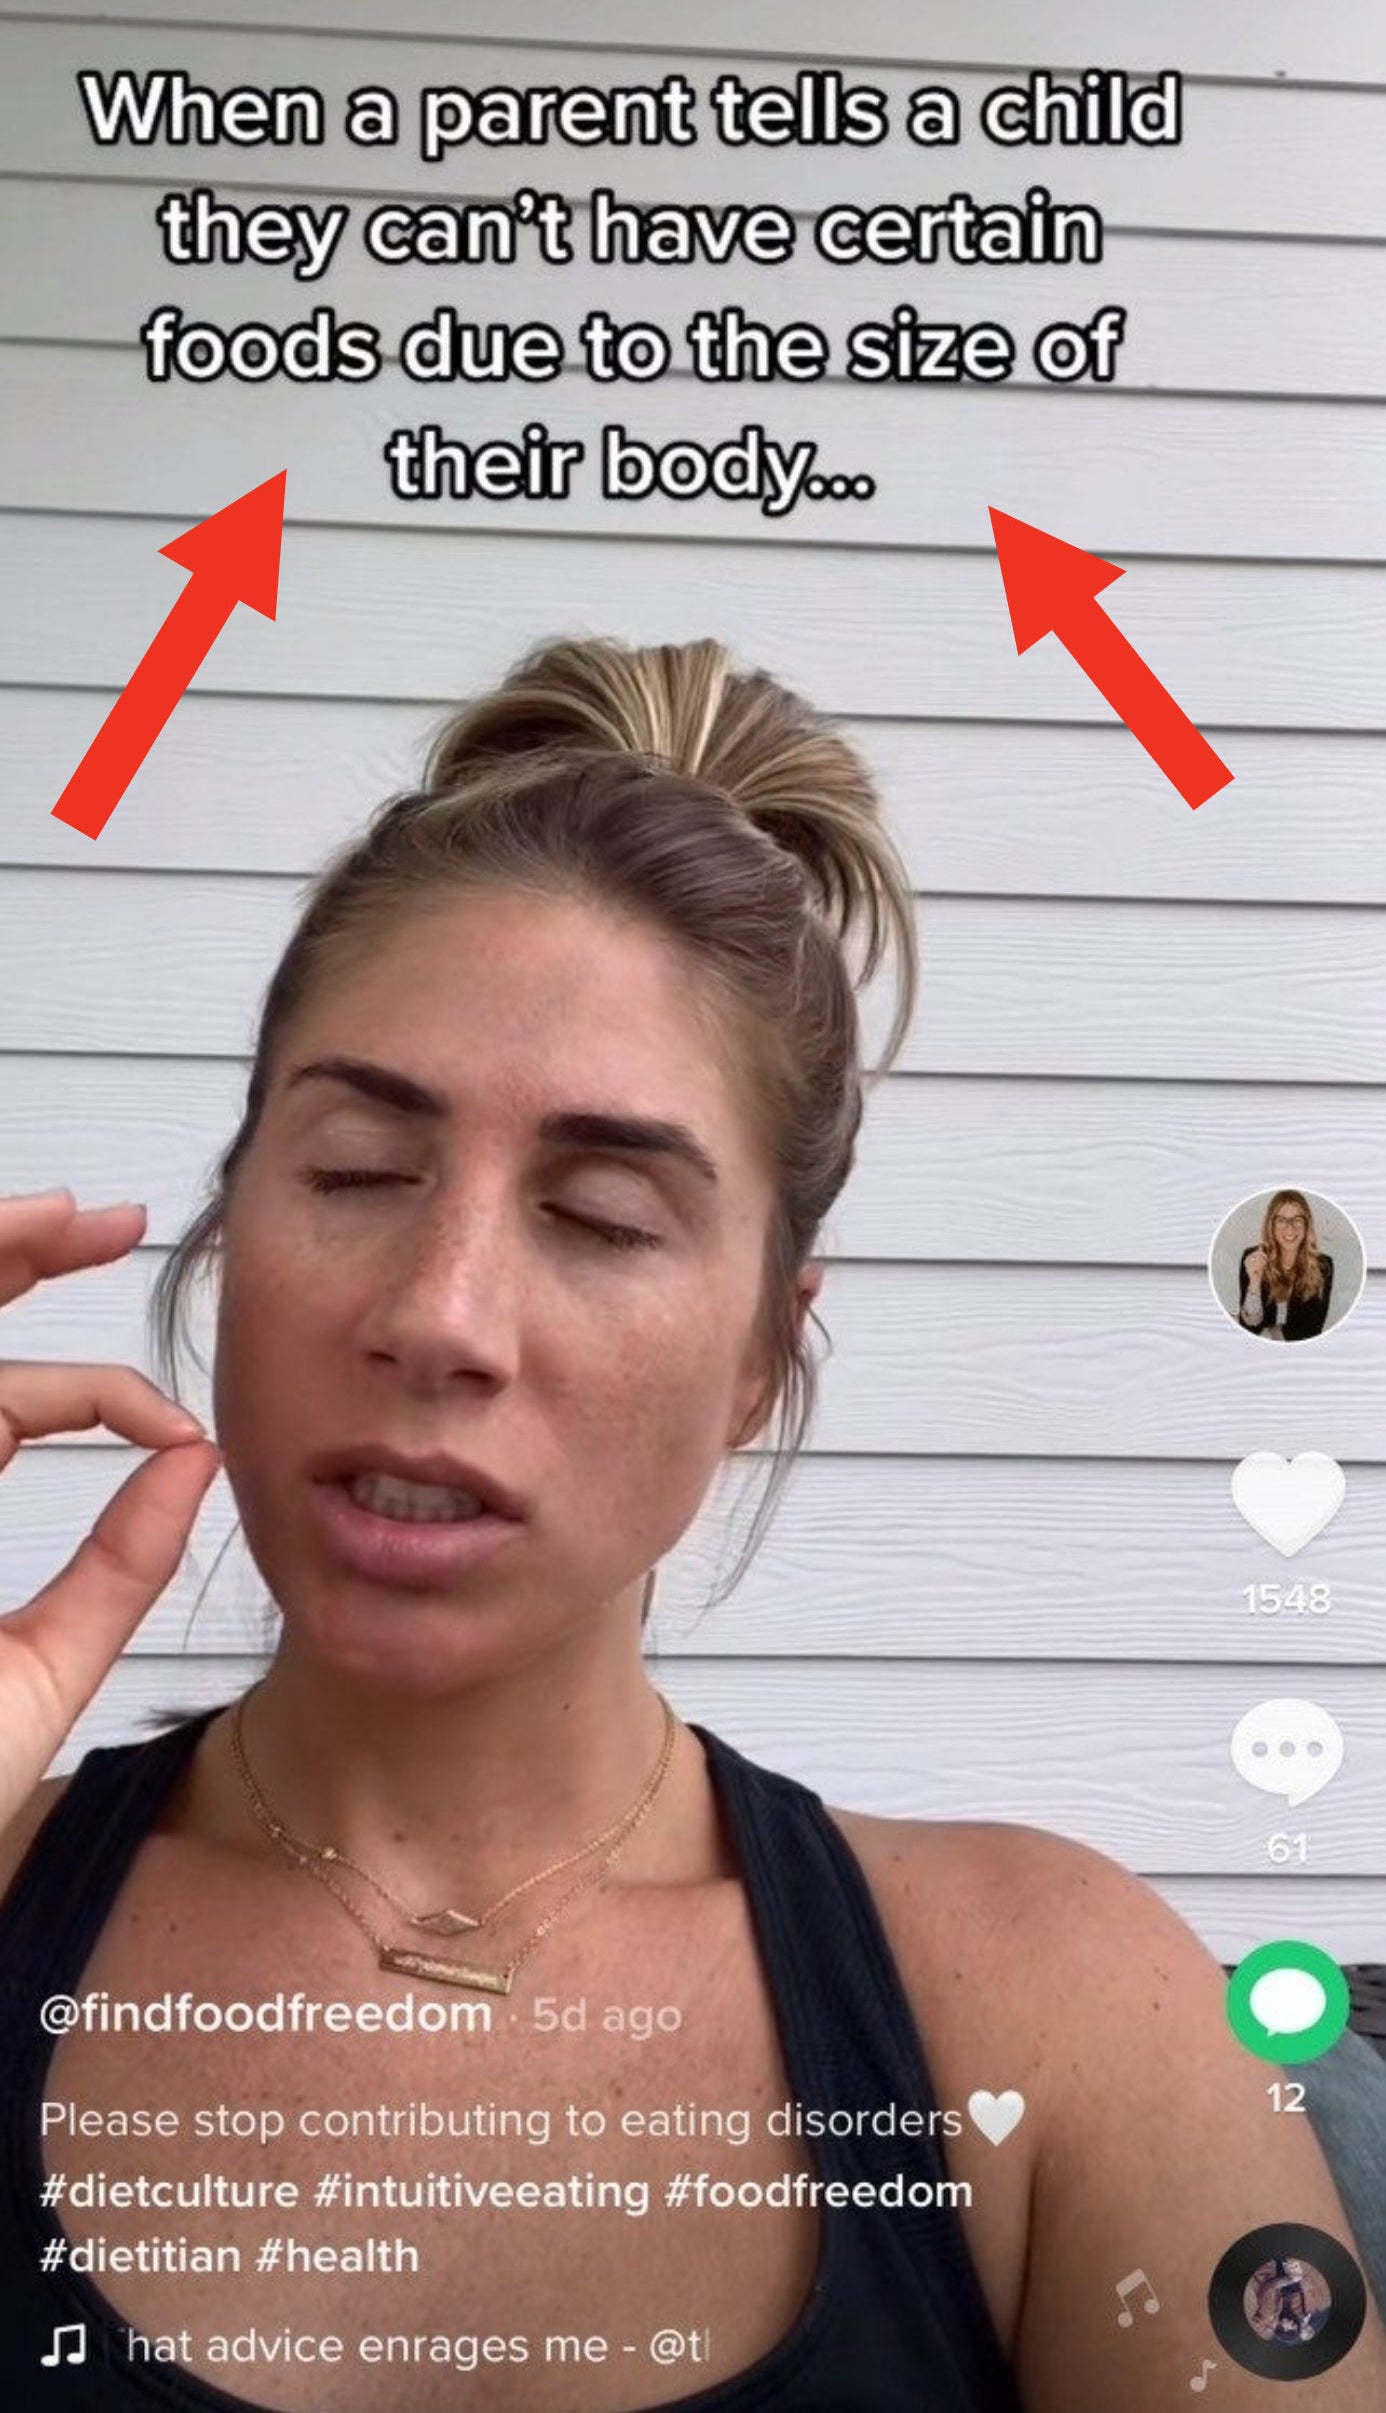 Screenshot of TikTok by Sam where she looks frustrated, with text: &quot;when a parent tells a child they can&#x27;t have certain foods due to the size of their body&quot;